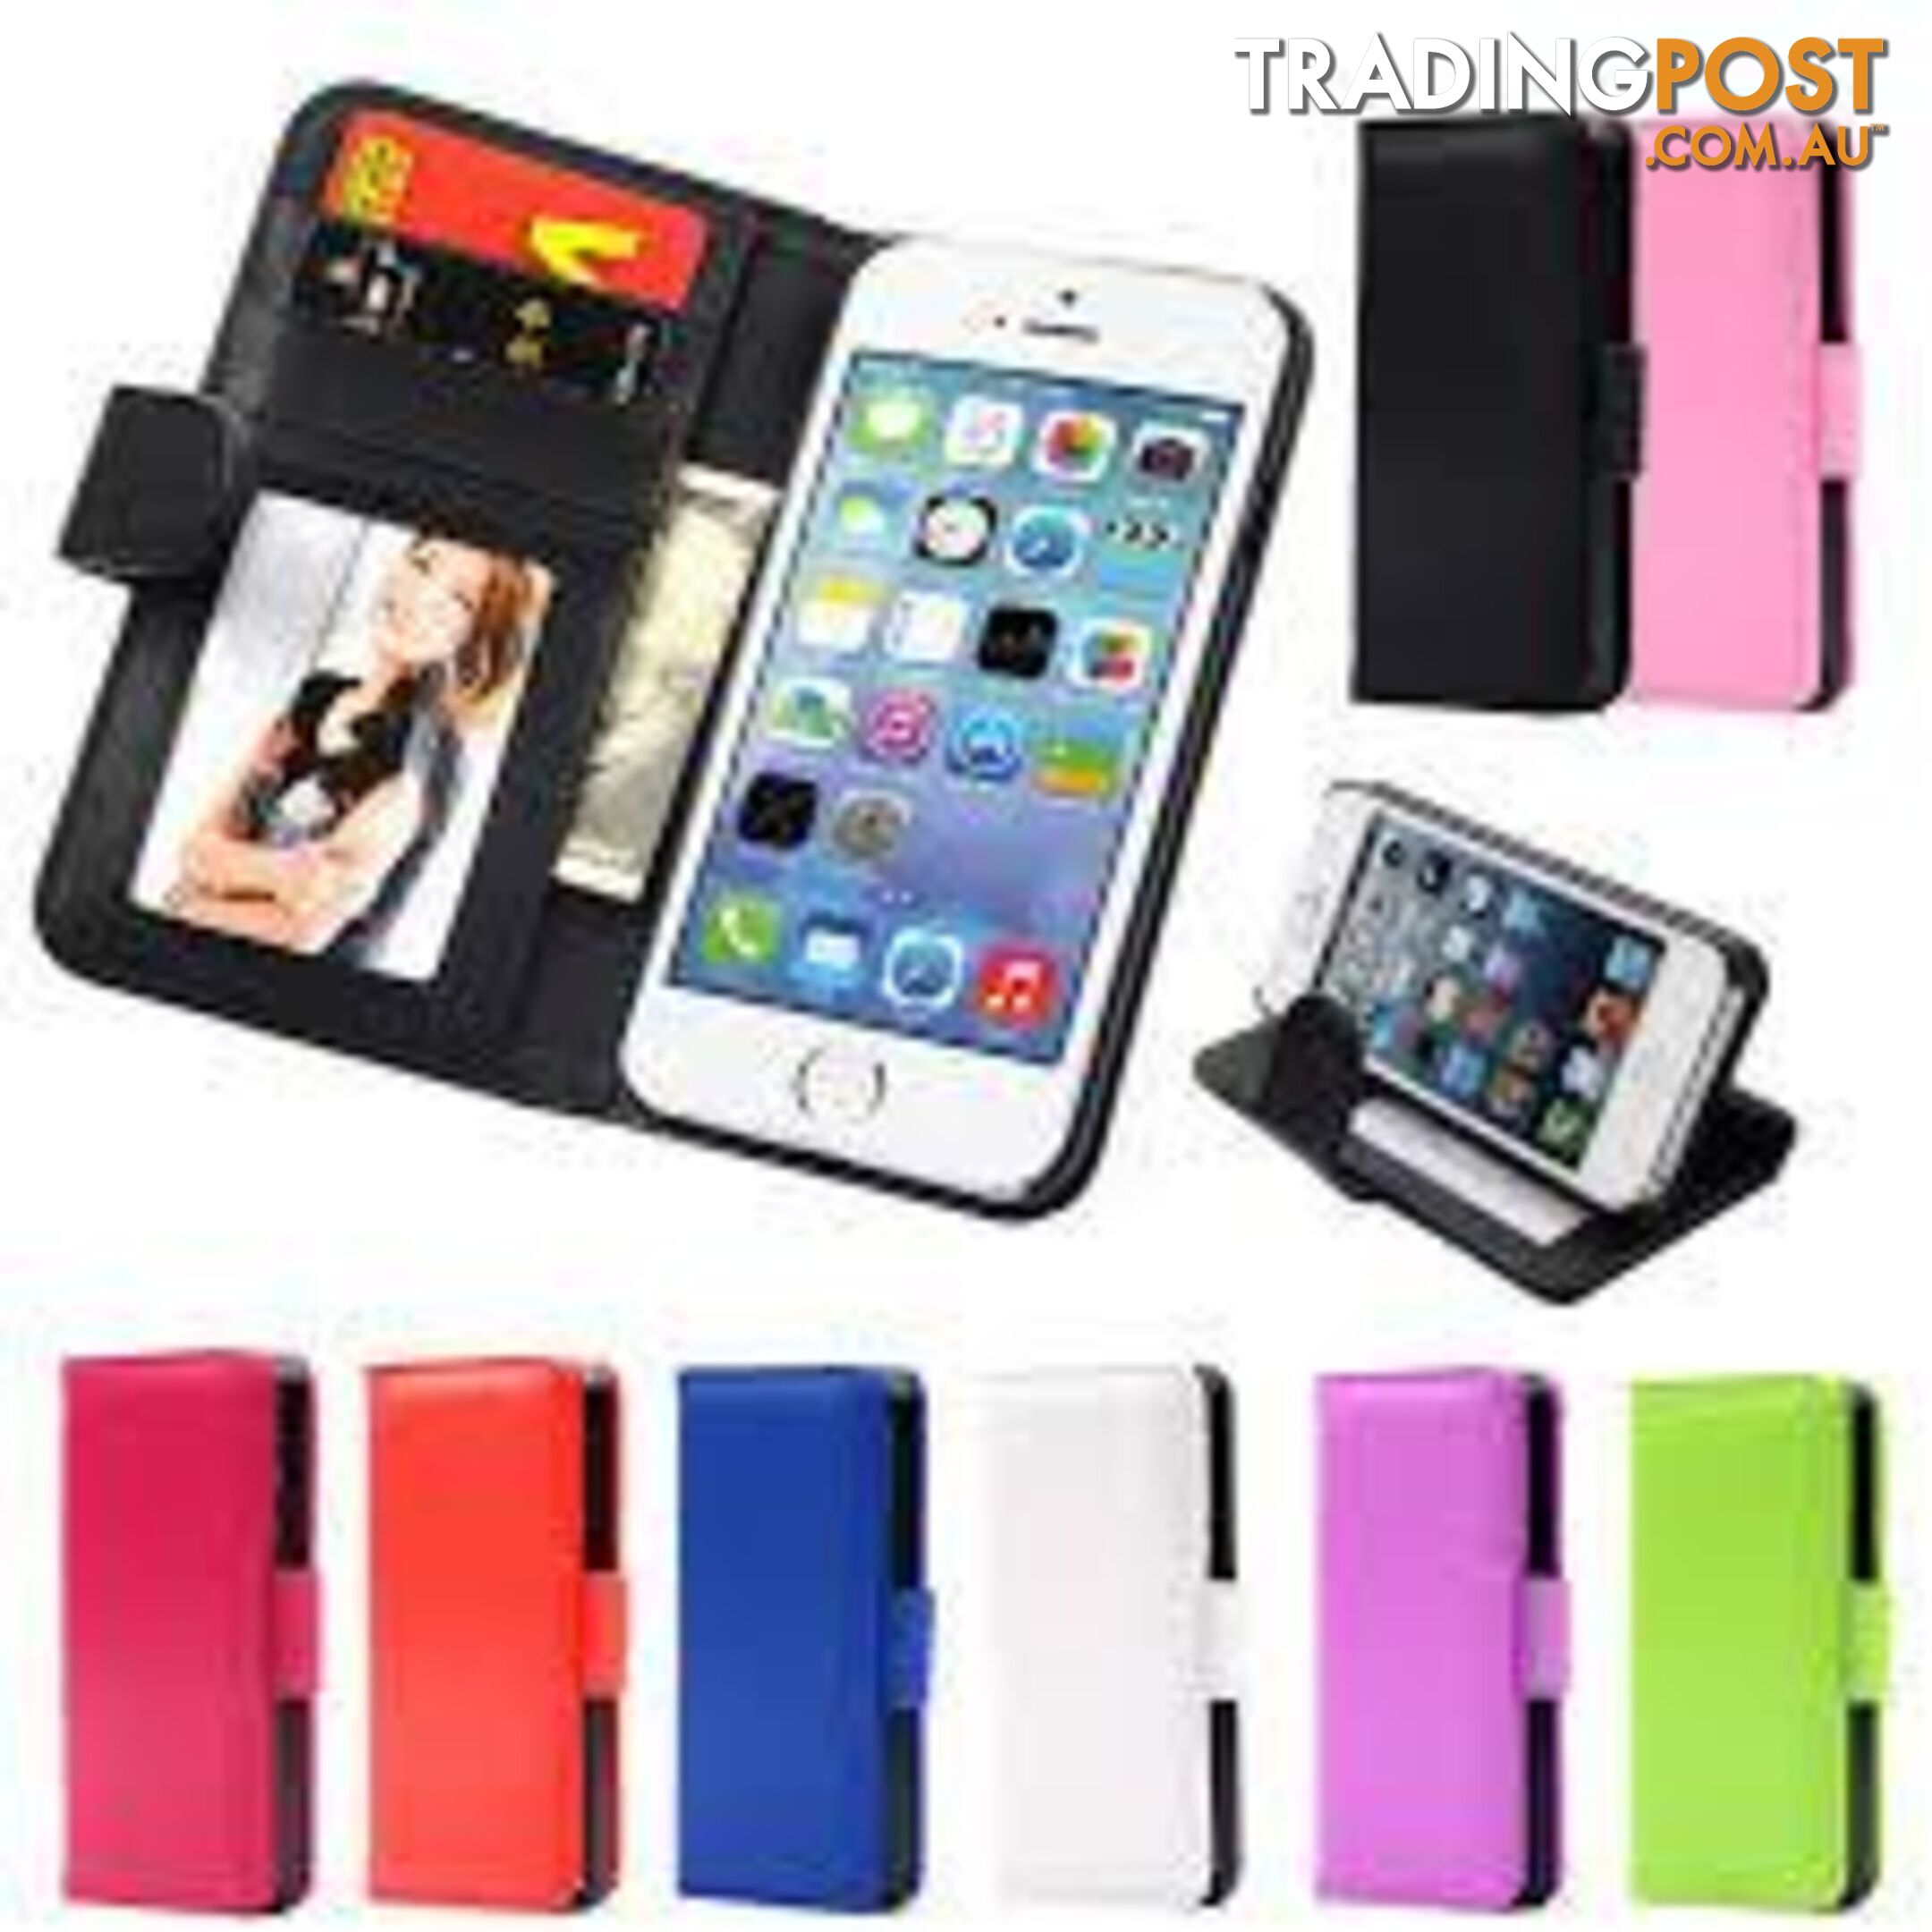 Apple iPhone Wallet Style Case - E94AB9 - Cases